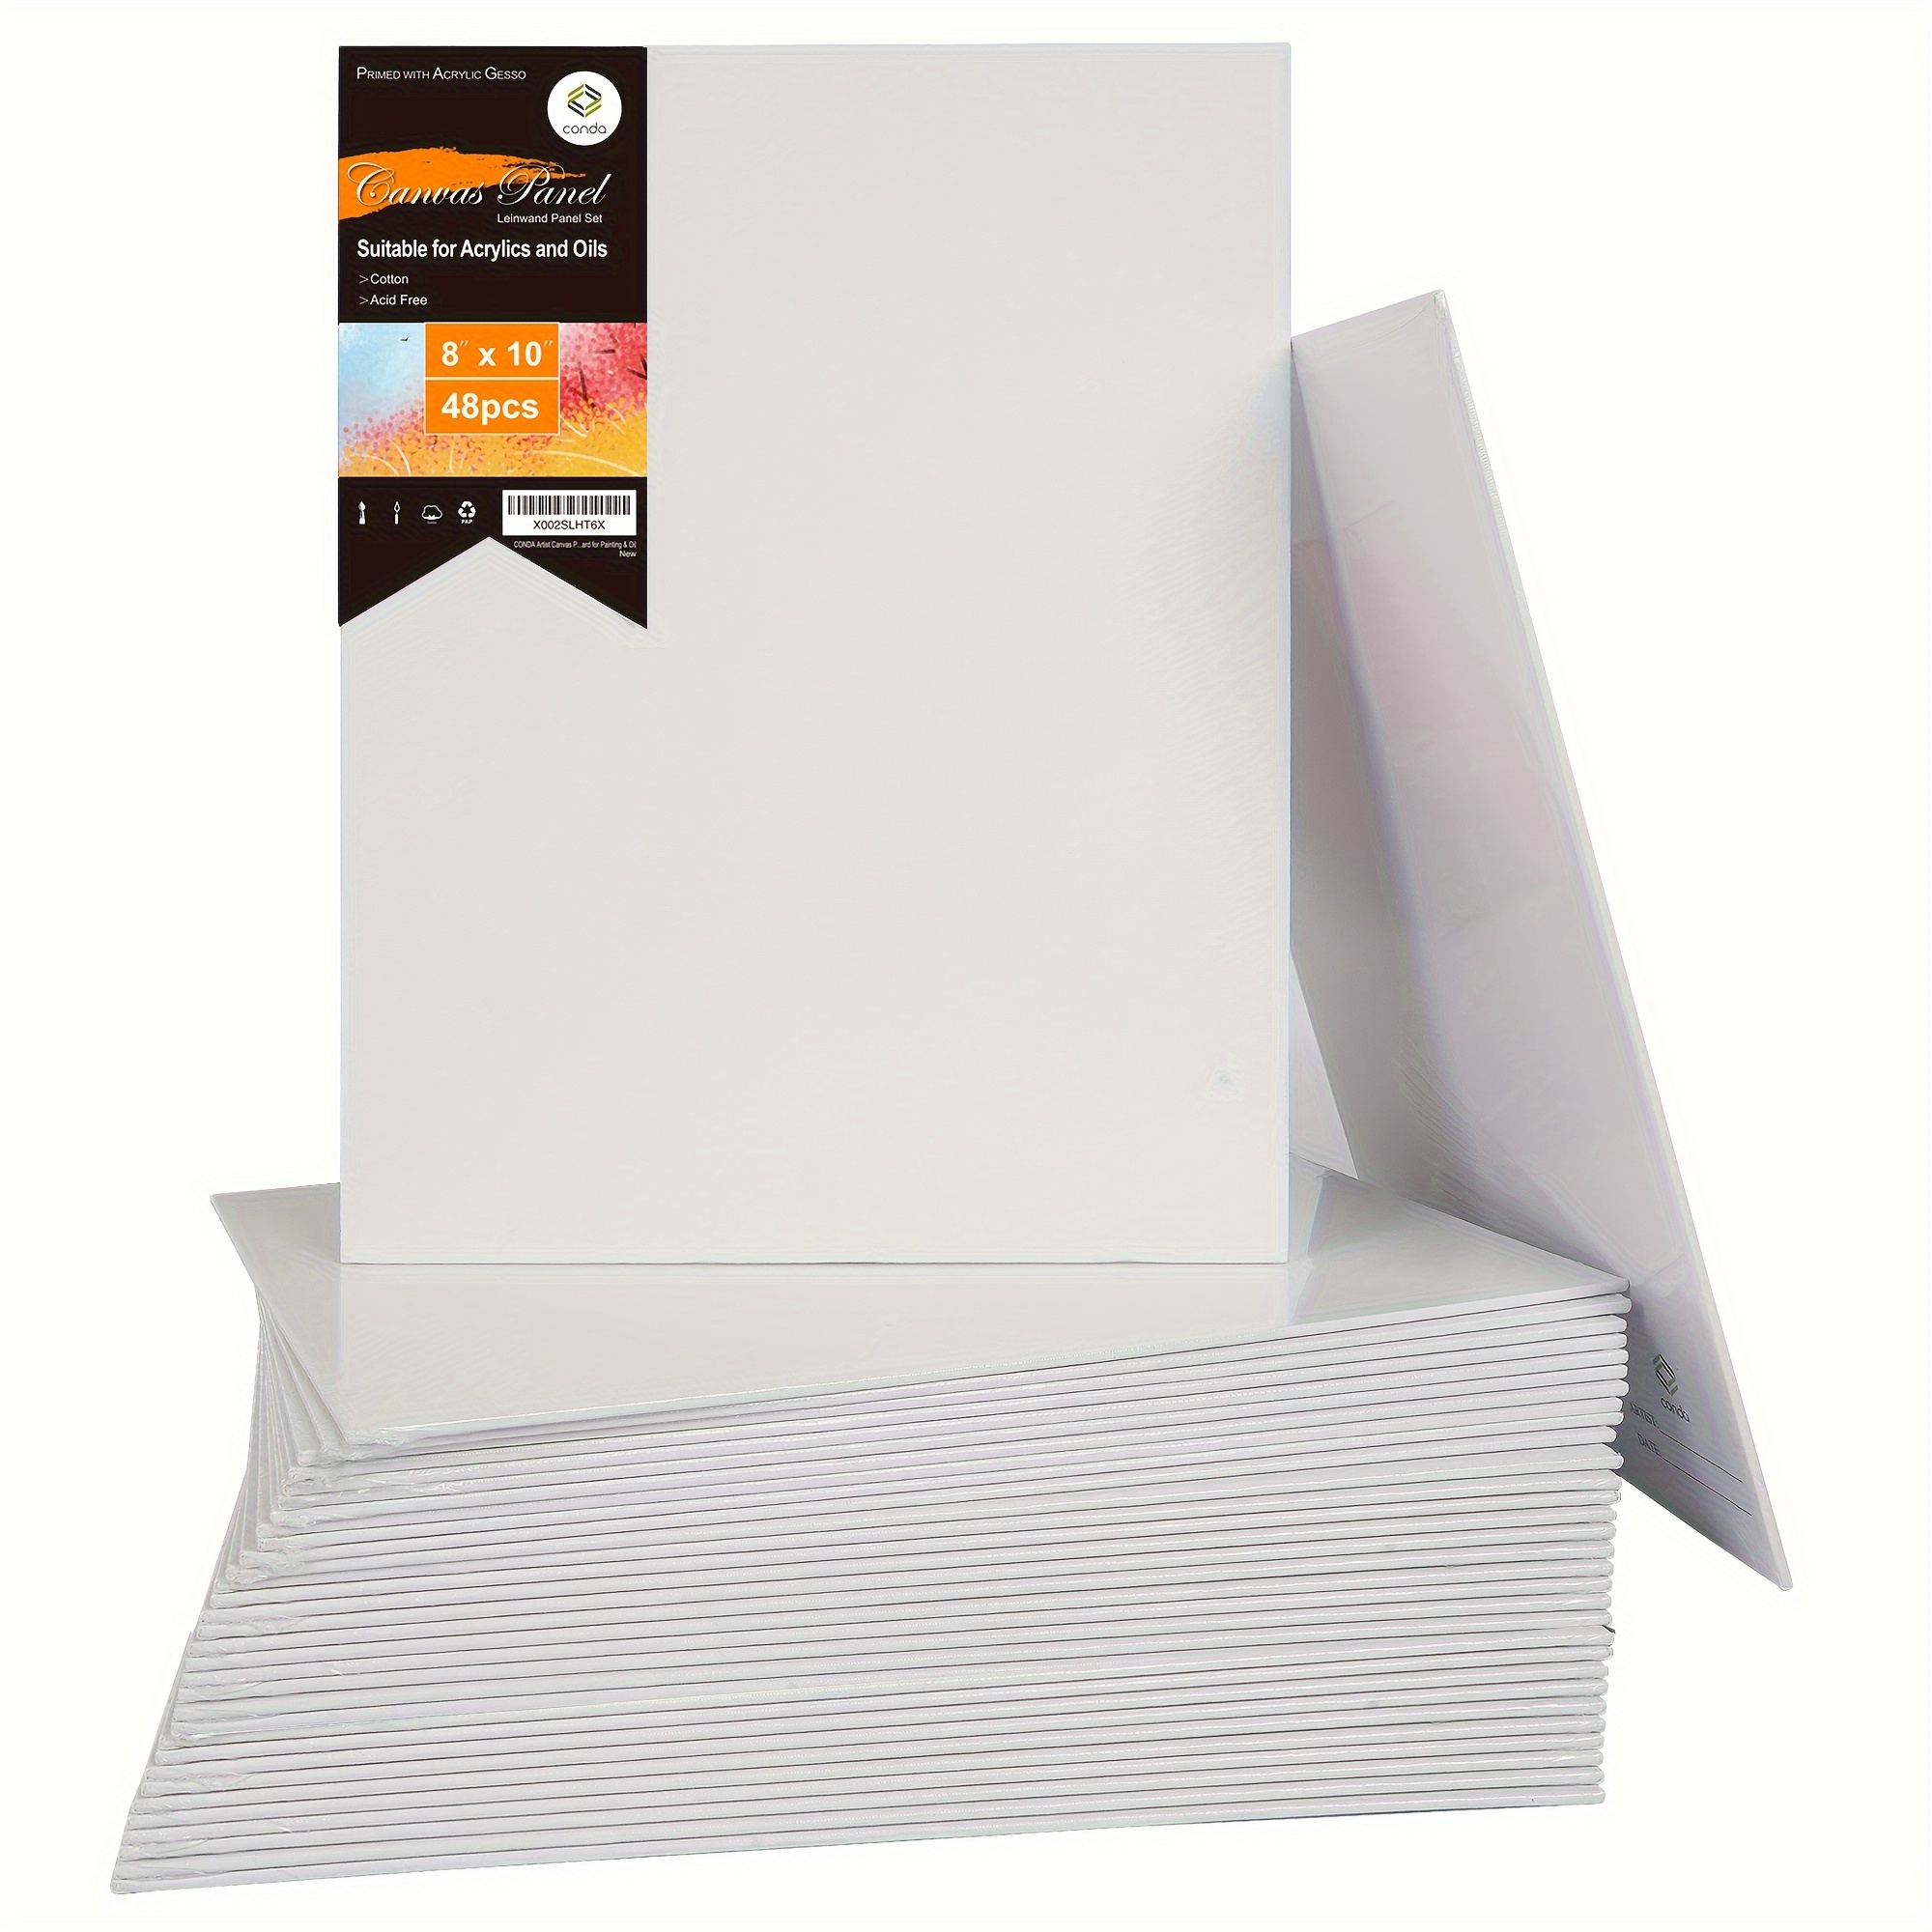 Stretched Canvases for Painting 2 Pack 30x40 Inch, 100% Cotton 12.3 oz  Triple Primed Painting Canvas, 3/4 Profile Acid-Free Large Paint Canvas  Blank